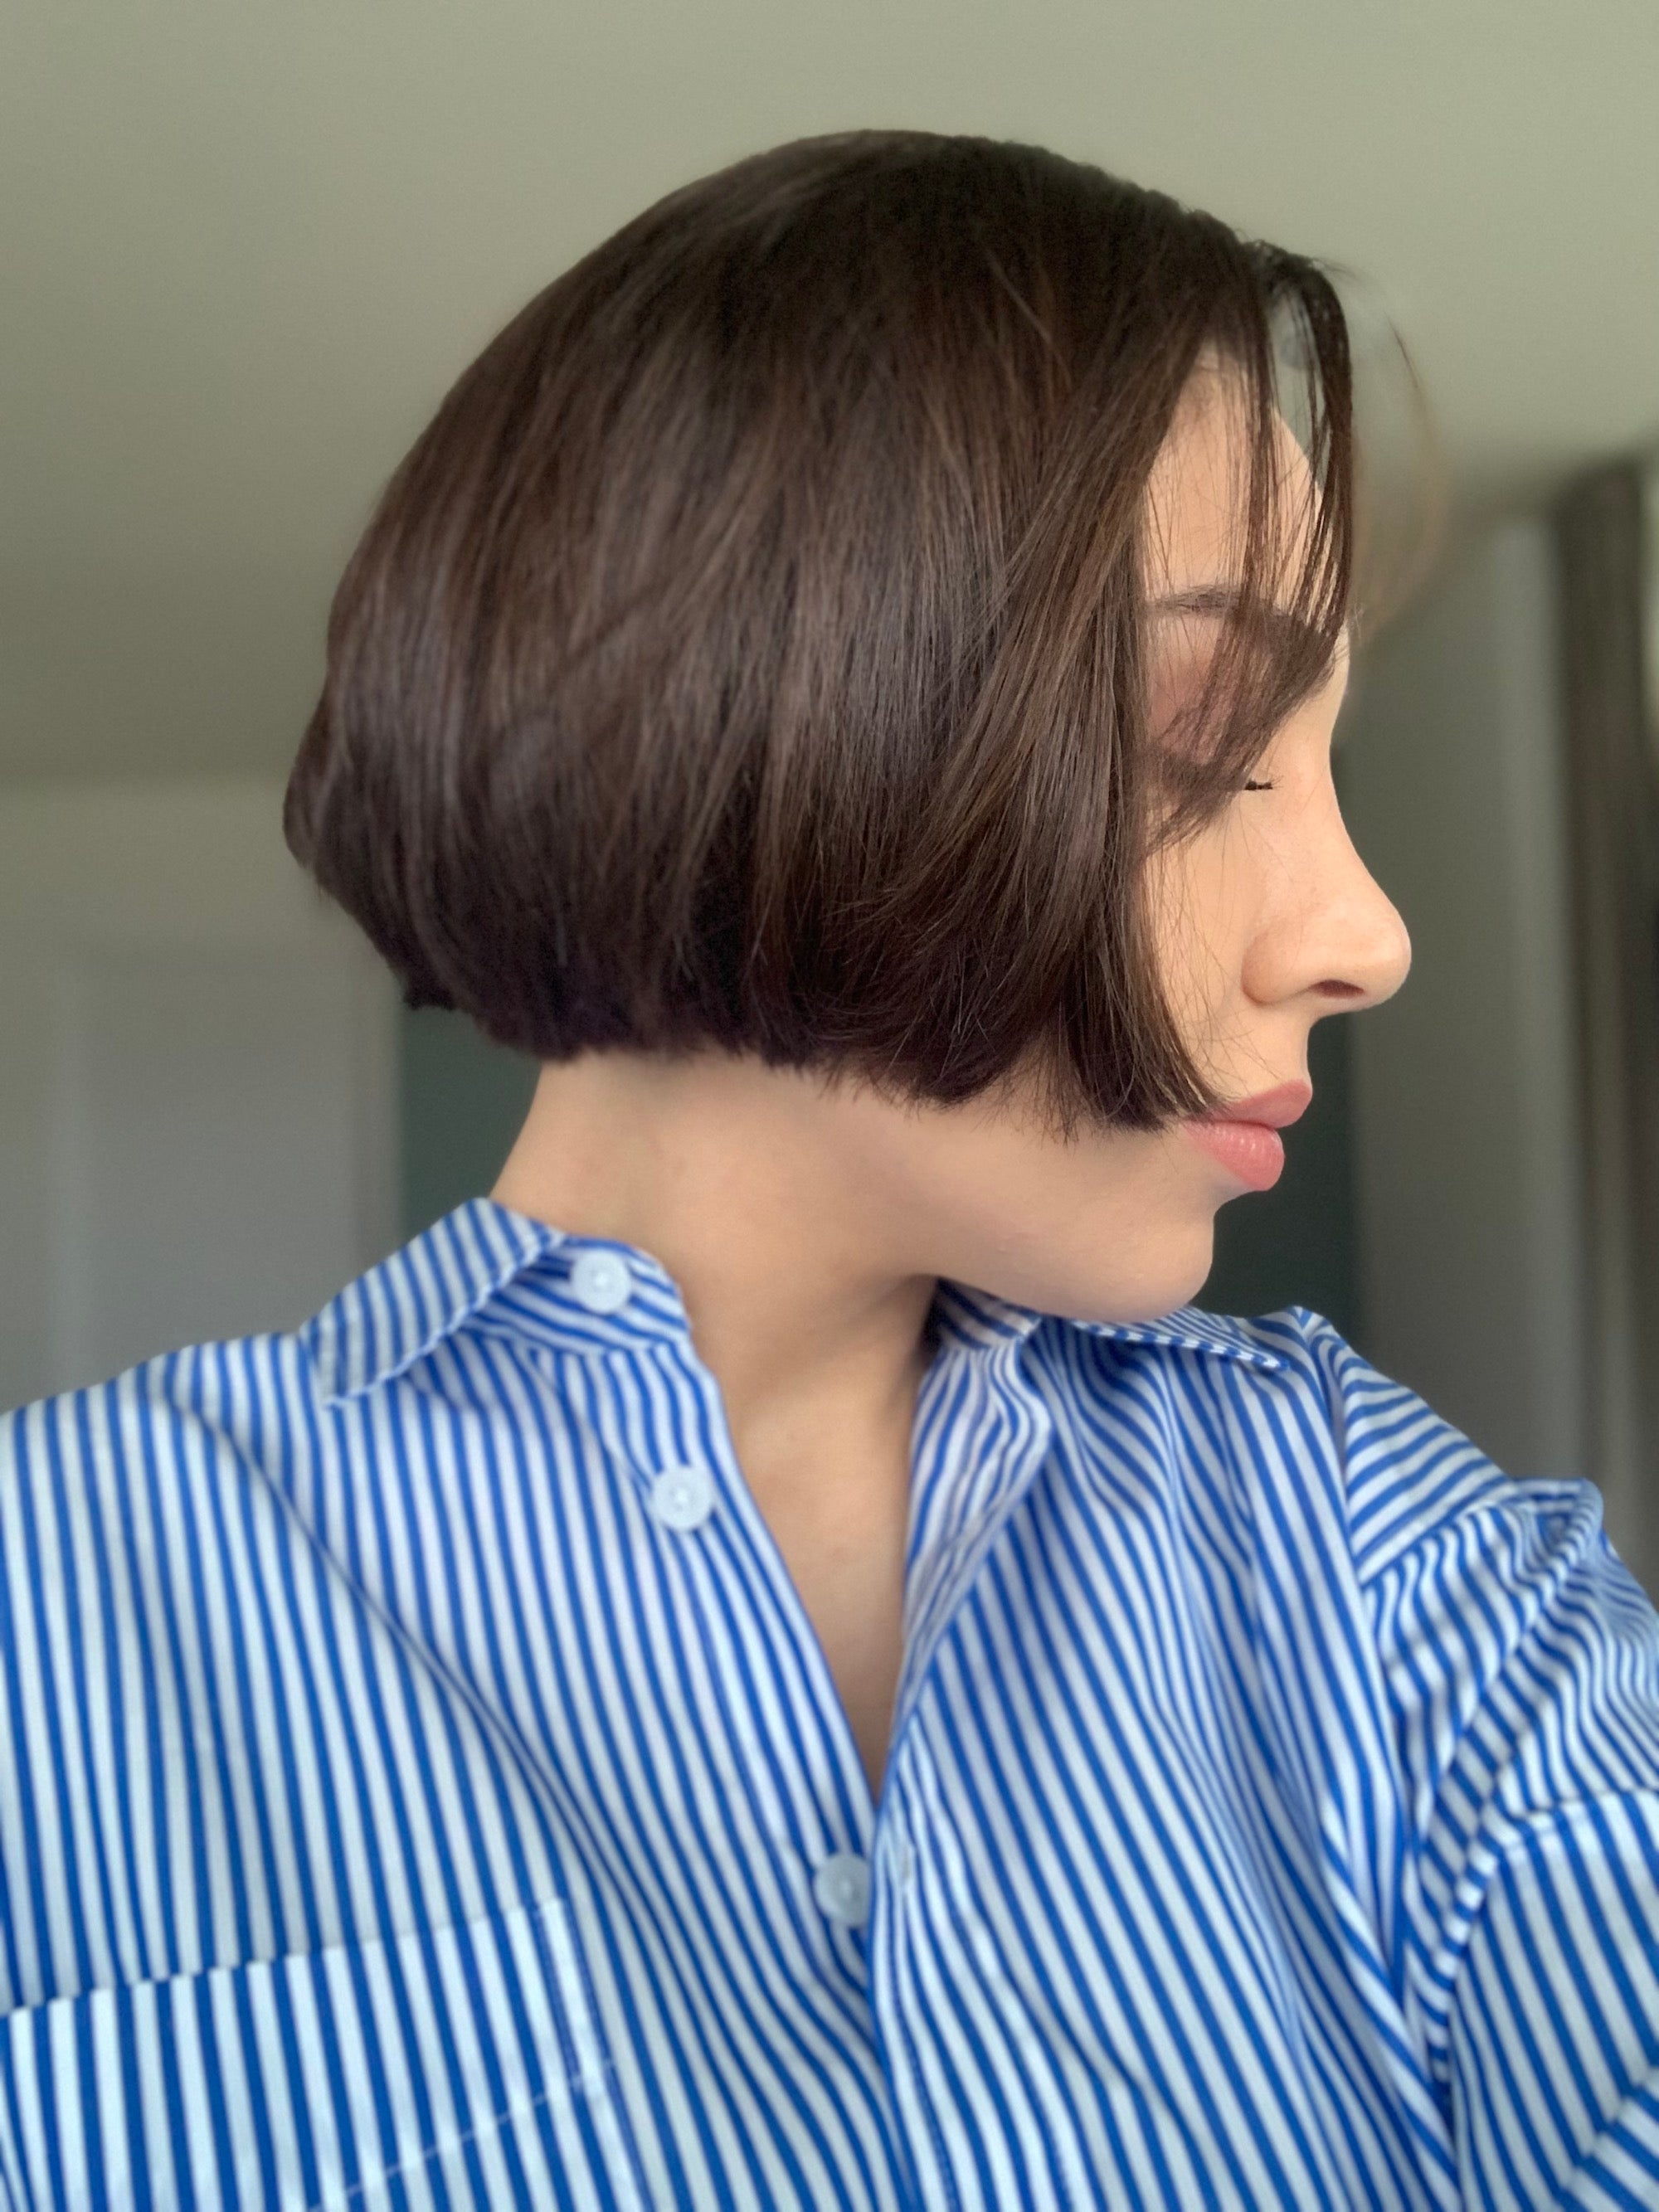 33 Asian Modern Short Bob Hairstyles For Woman And Girls 2022 Glamorous  Look - YouTube